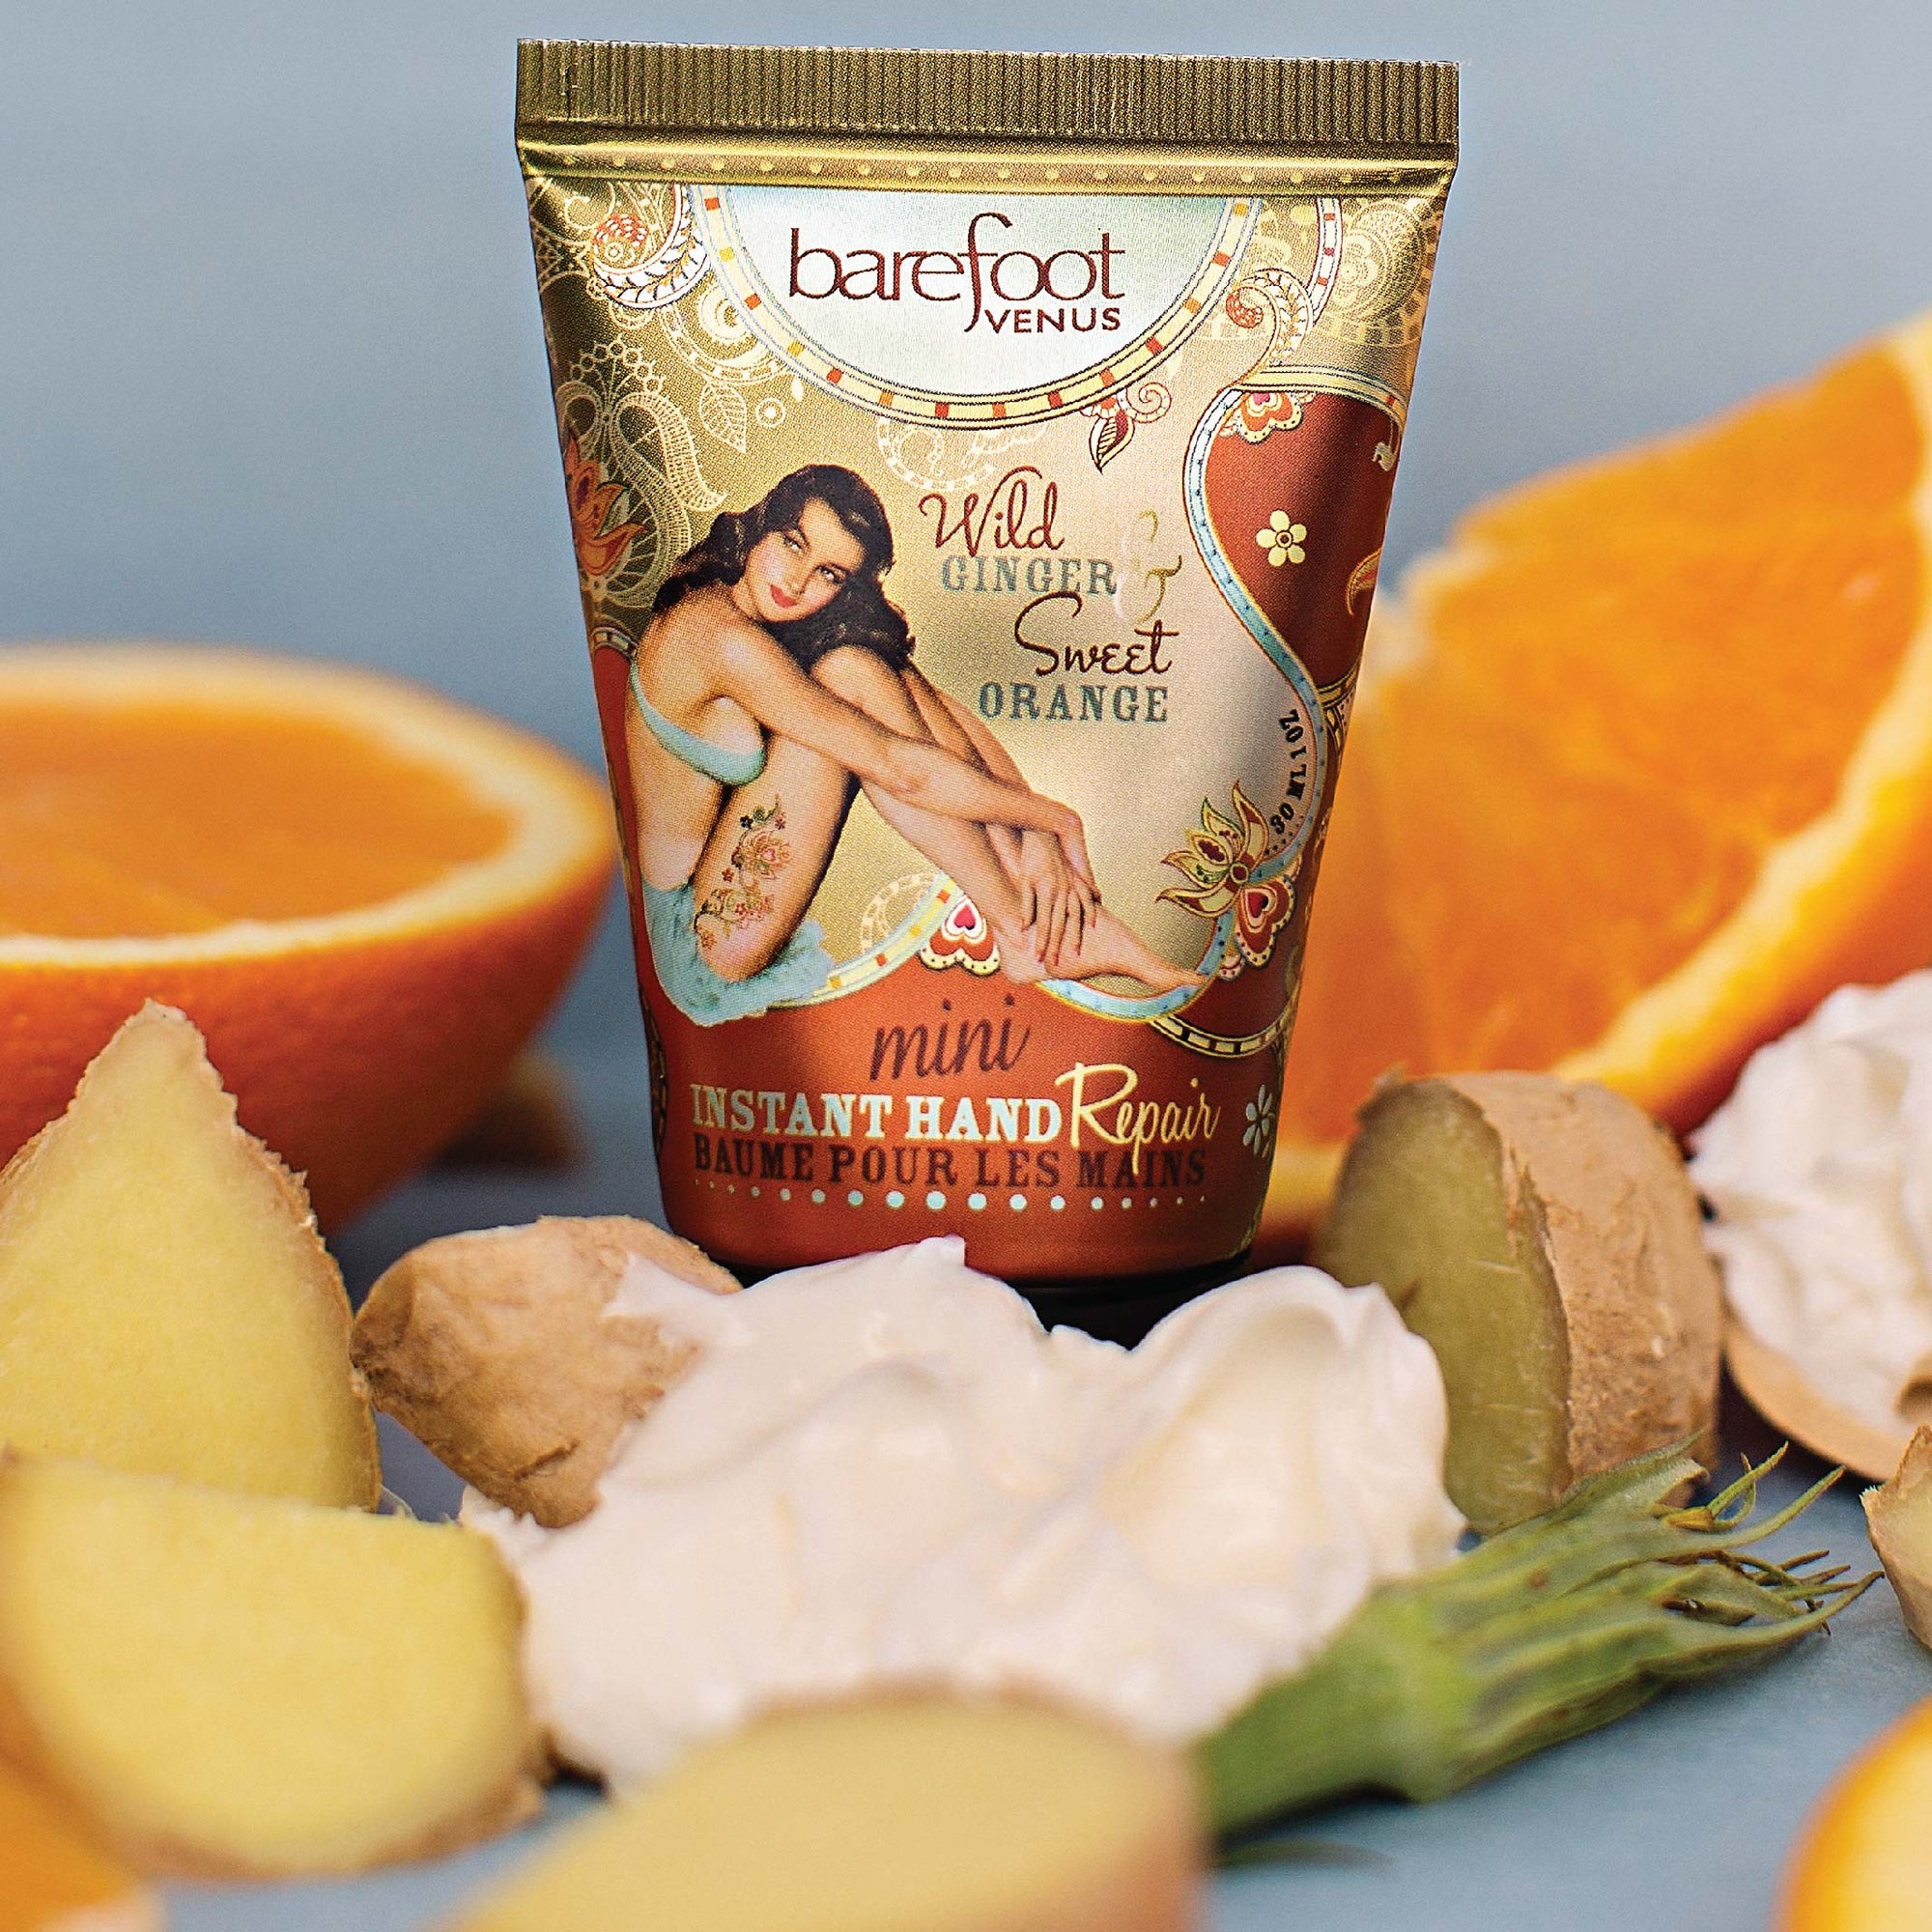 Wild Ginger & Sweet Orange Instant Hand Repair ON-THE-GO. INTENSELY HYDRATING. Barefoot Venus